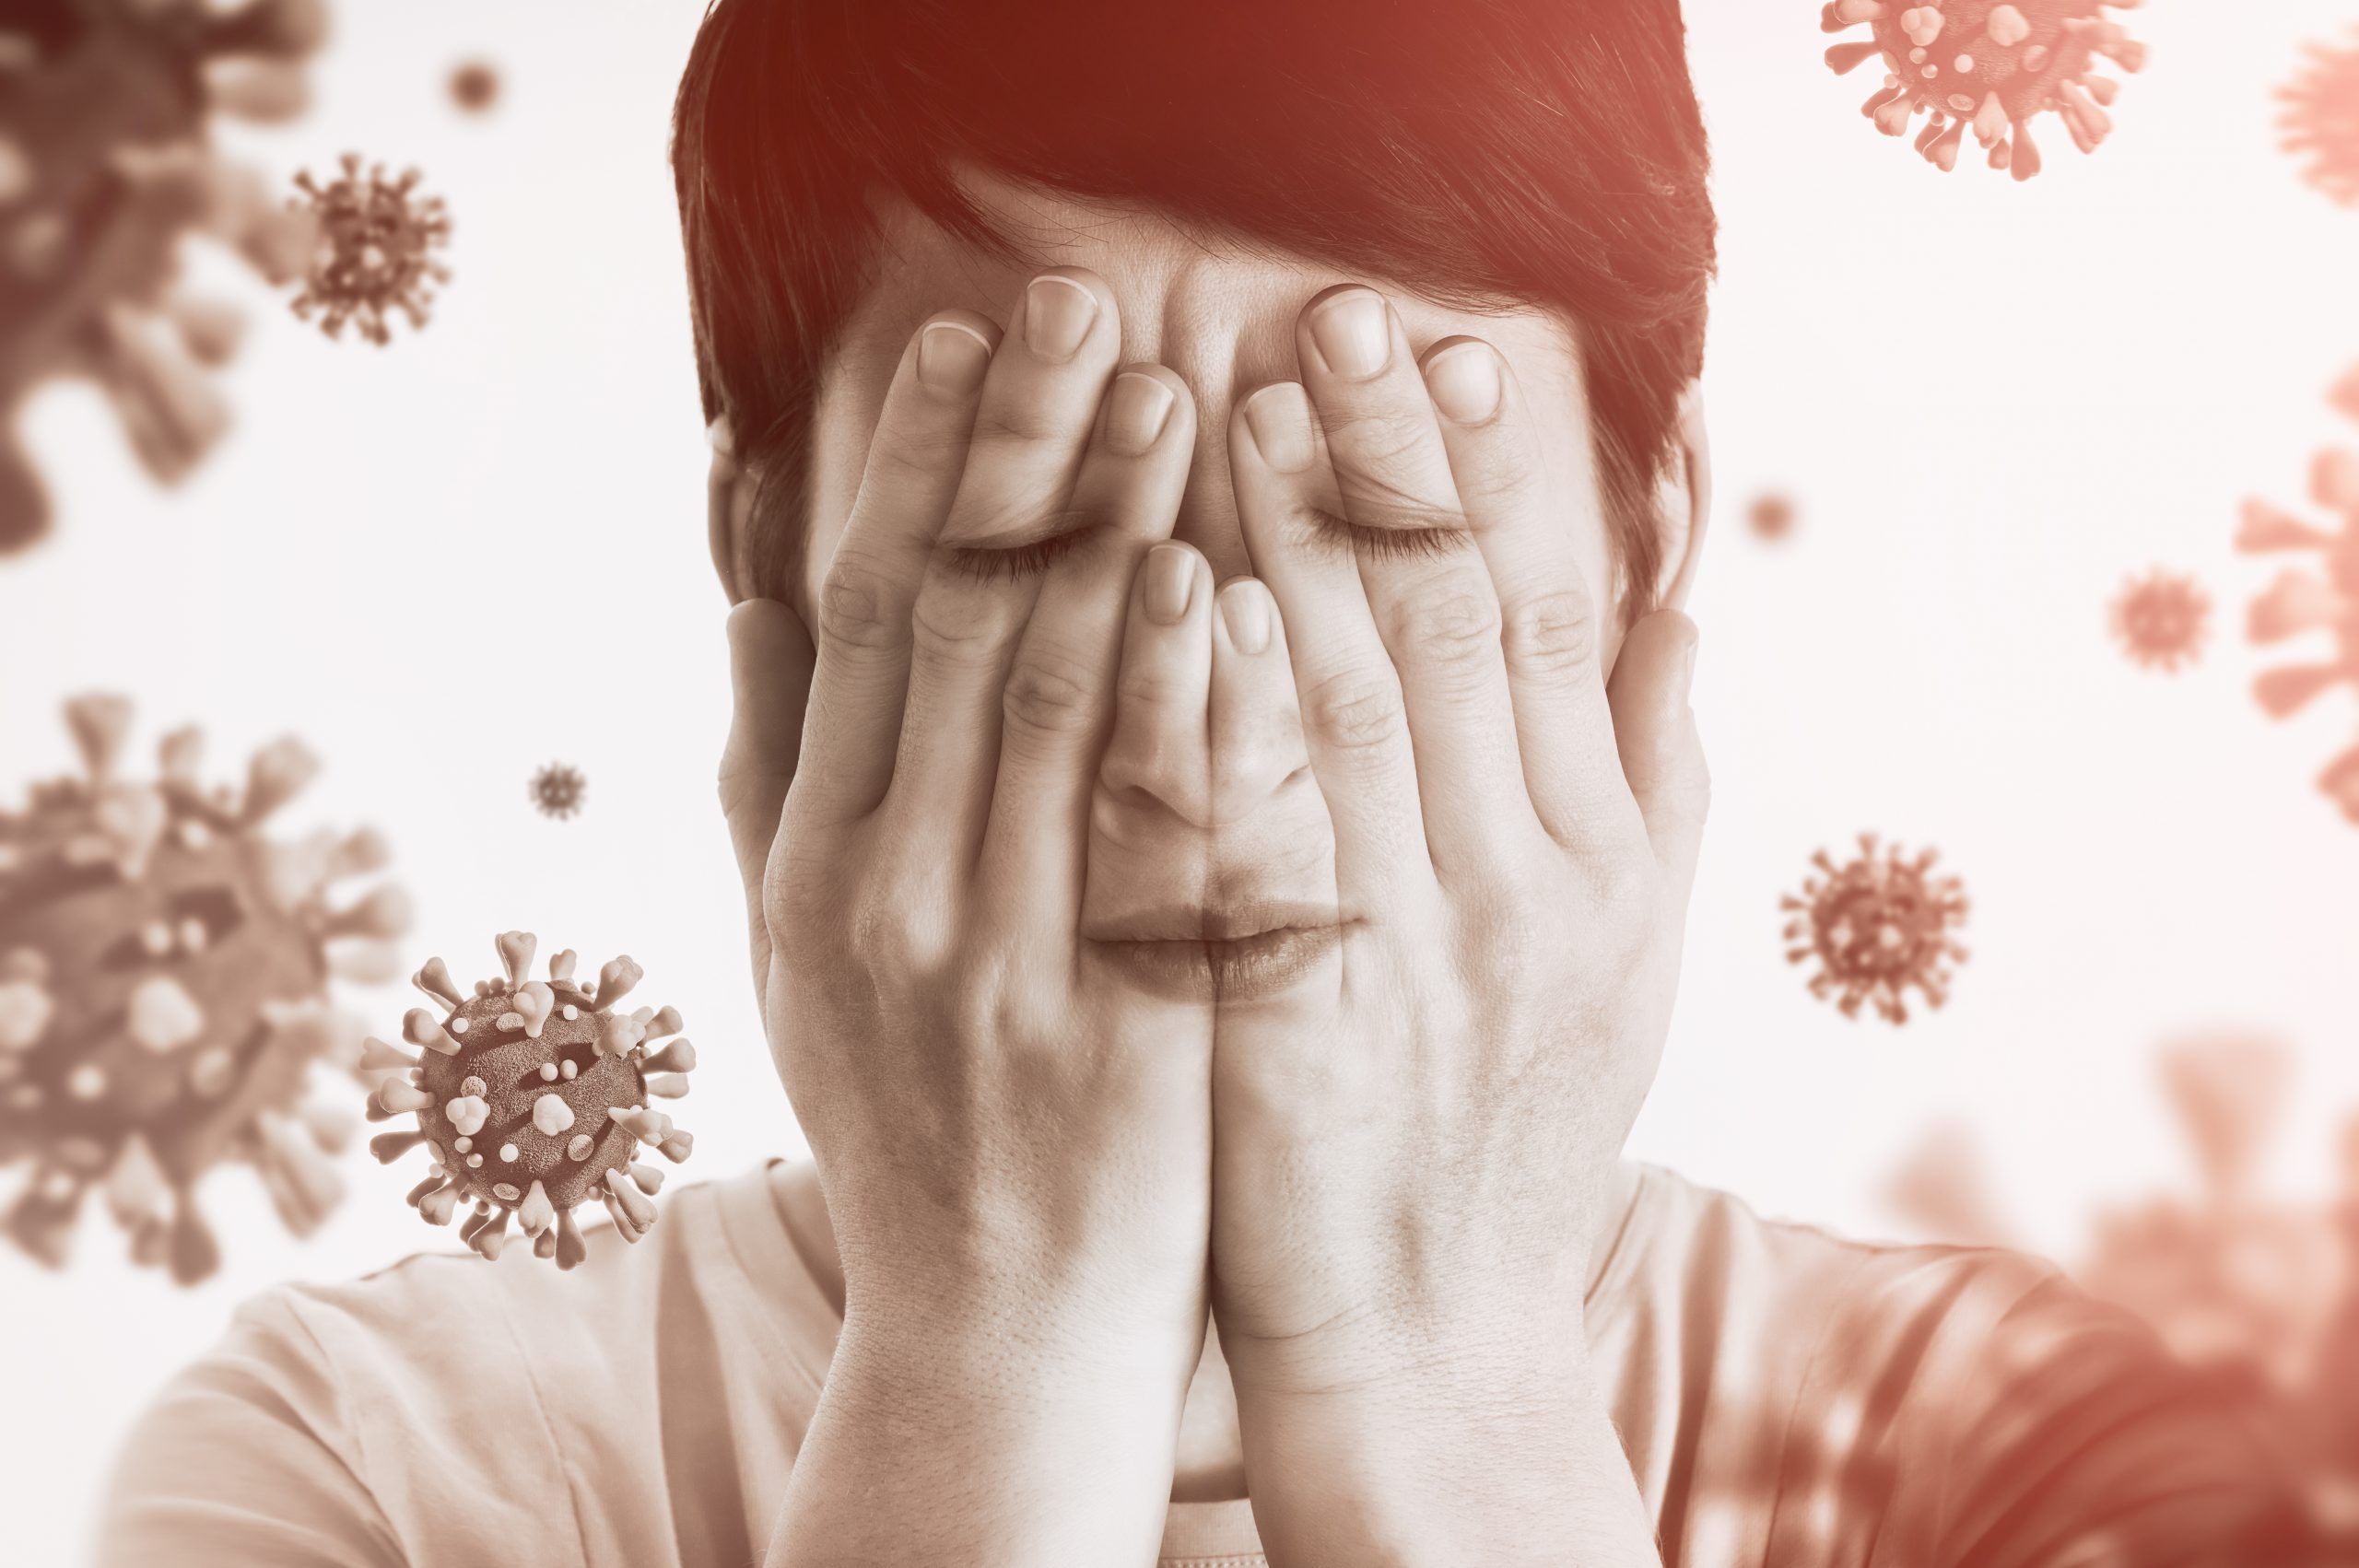 Concept of fear of coronavirus. Woman covers her face her hands on background with coronavirus.